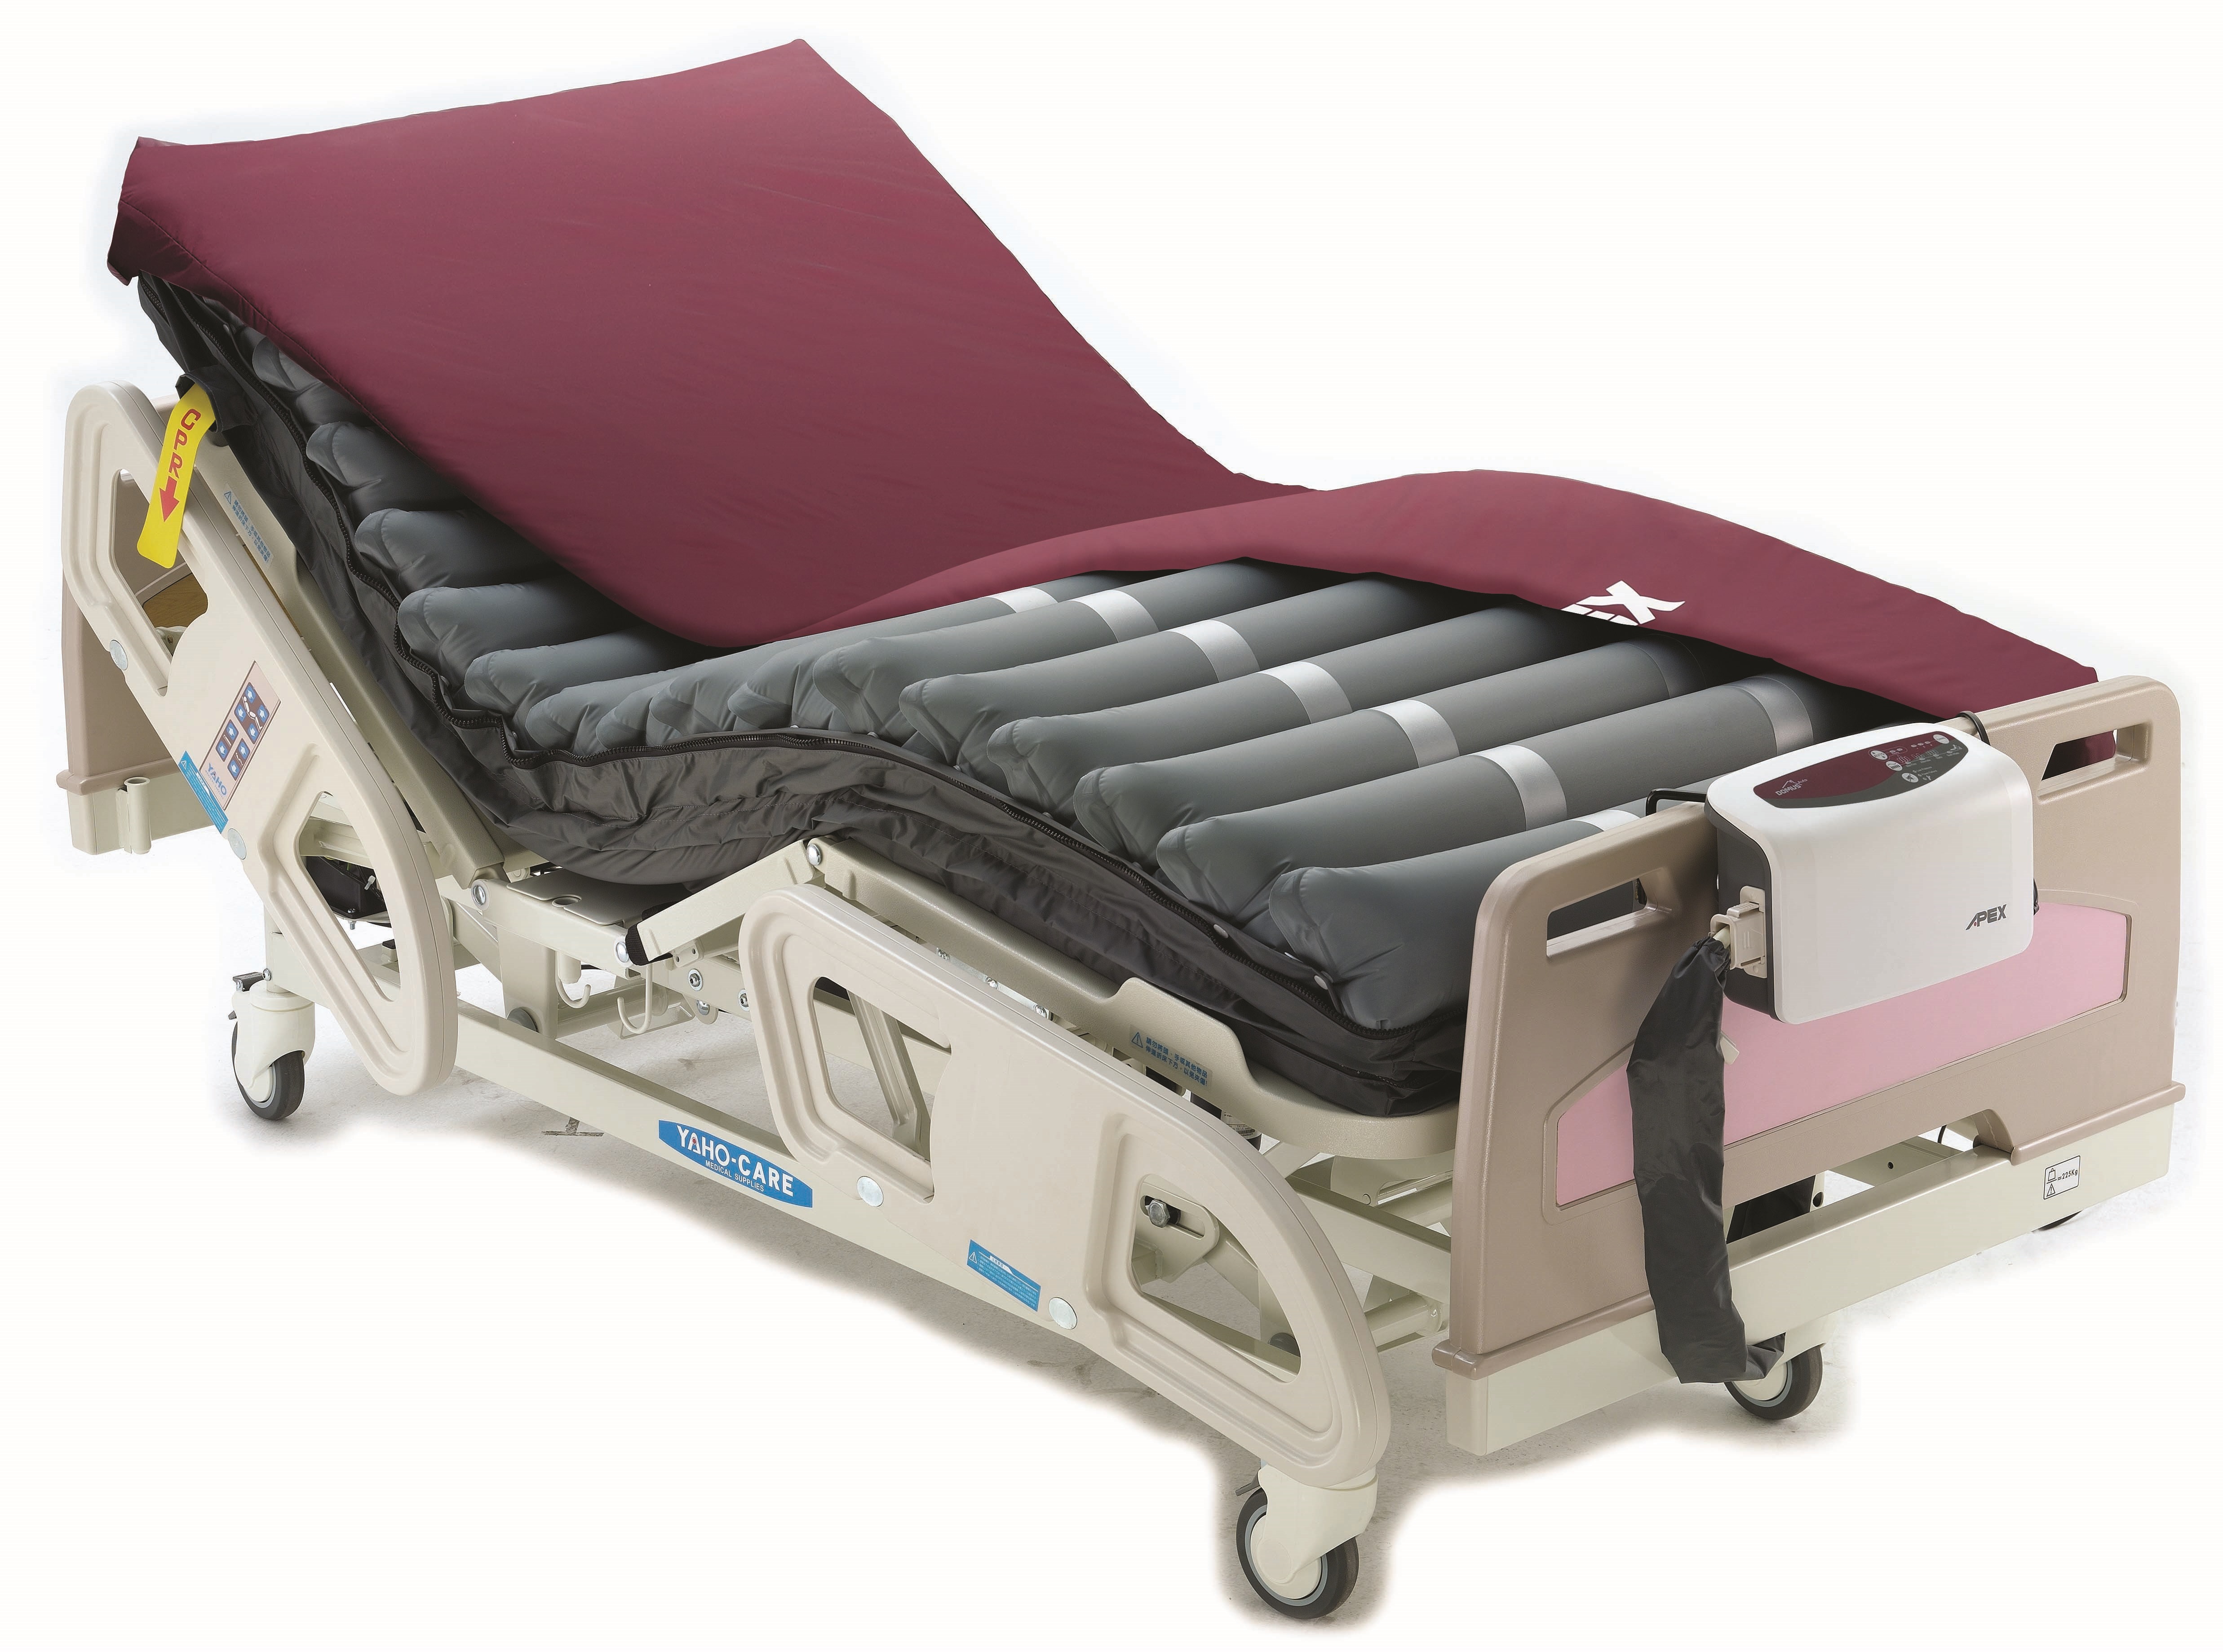 Domus Auto - Medical Bed - ES Wellell